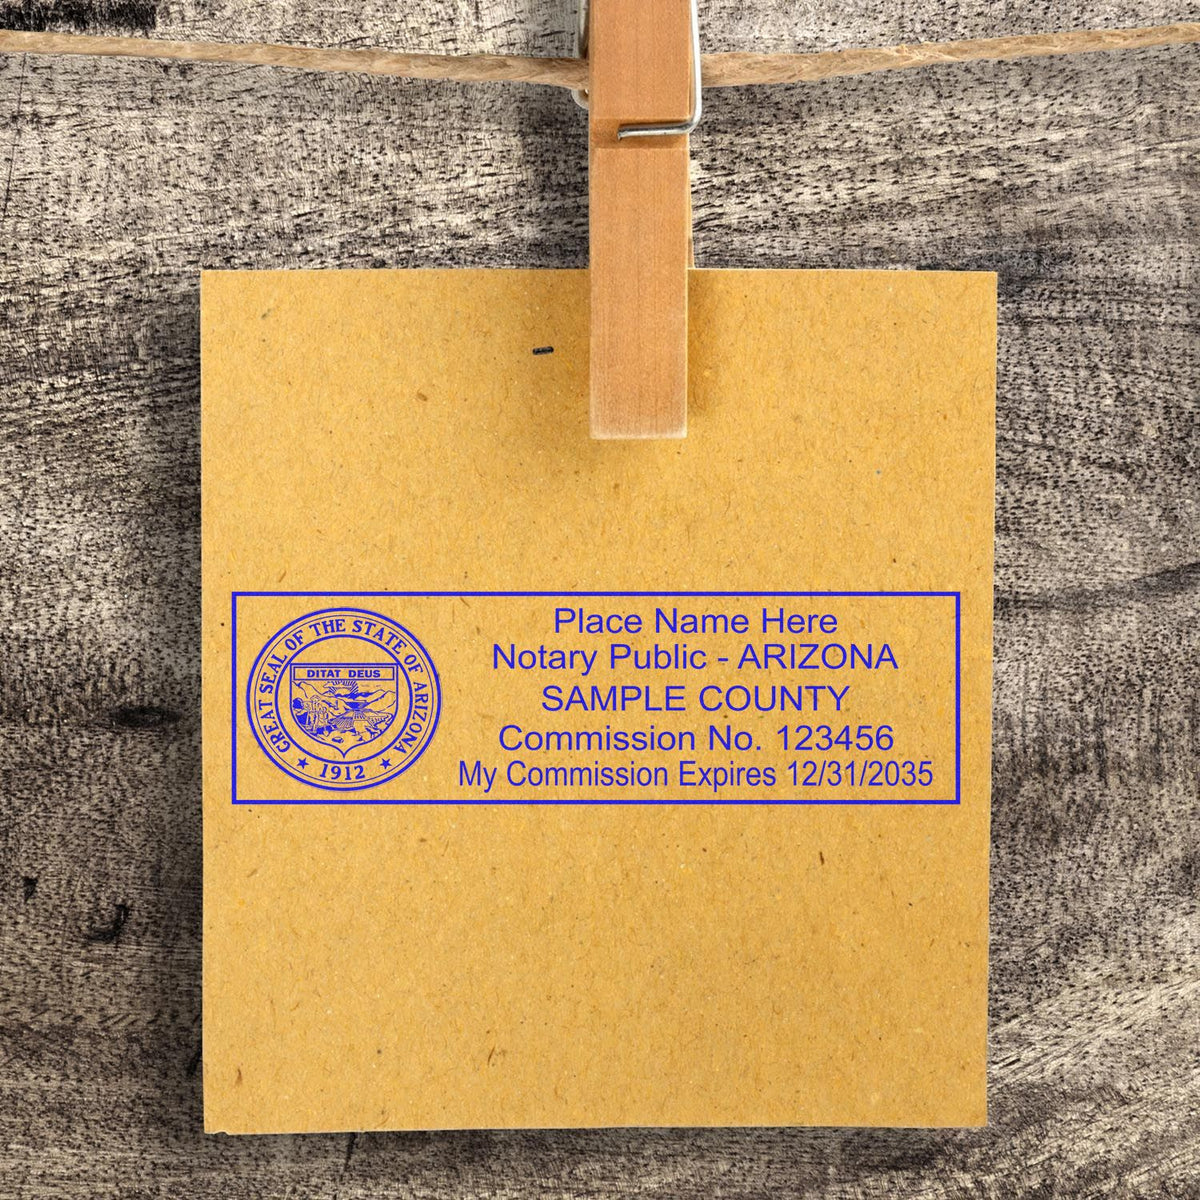 An alternative view of the PSI Arizona Notary Stamp stamped on a sheet of paper showing the image in use